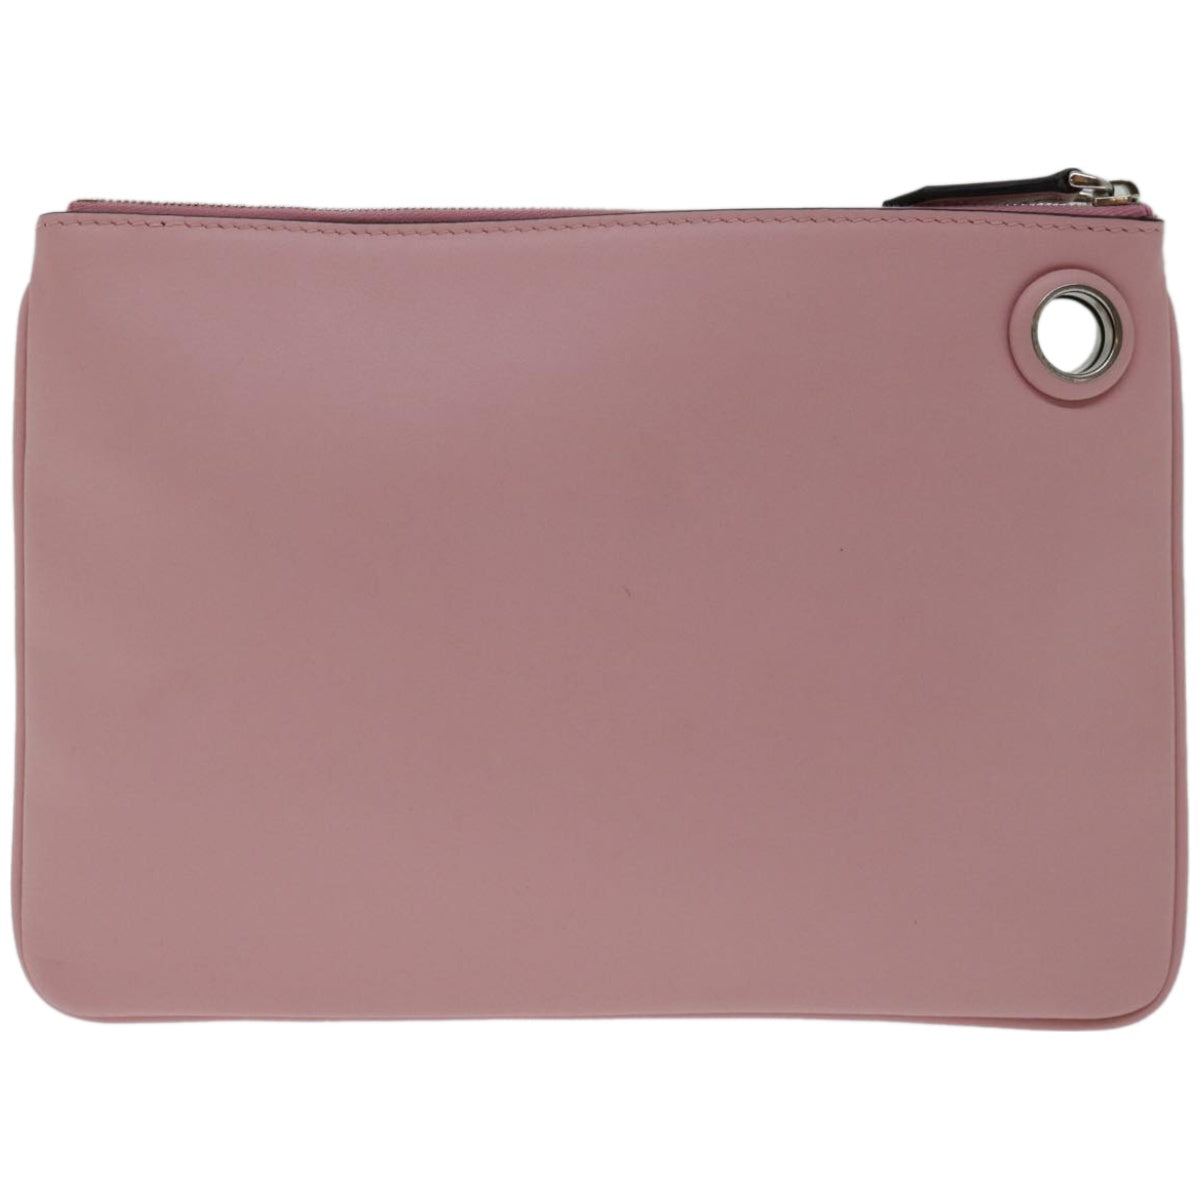 FENDI Pouch Leather Pink Auth bs12269 - 0